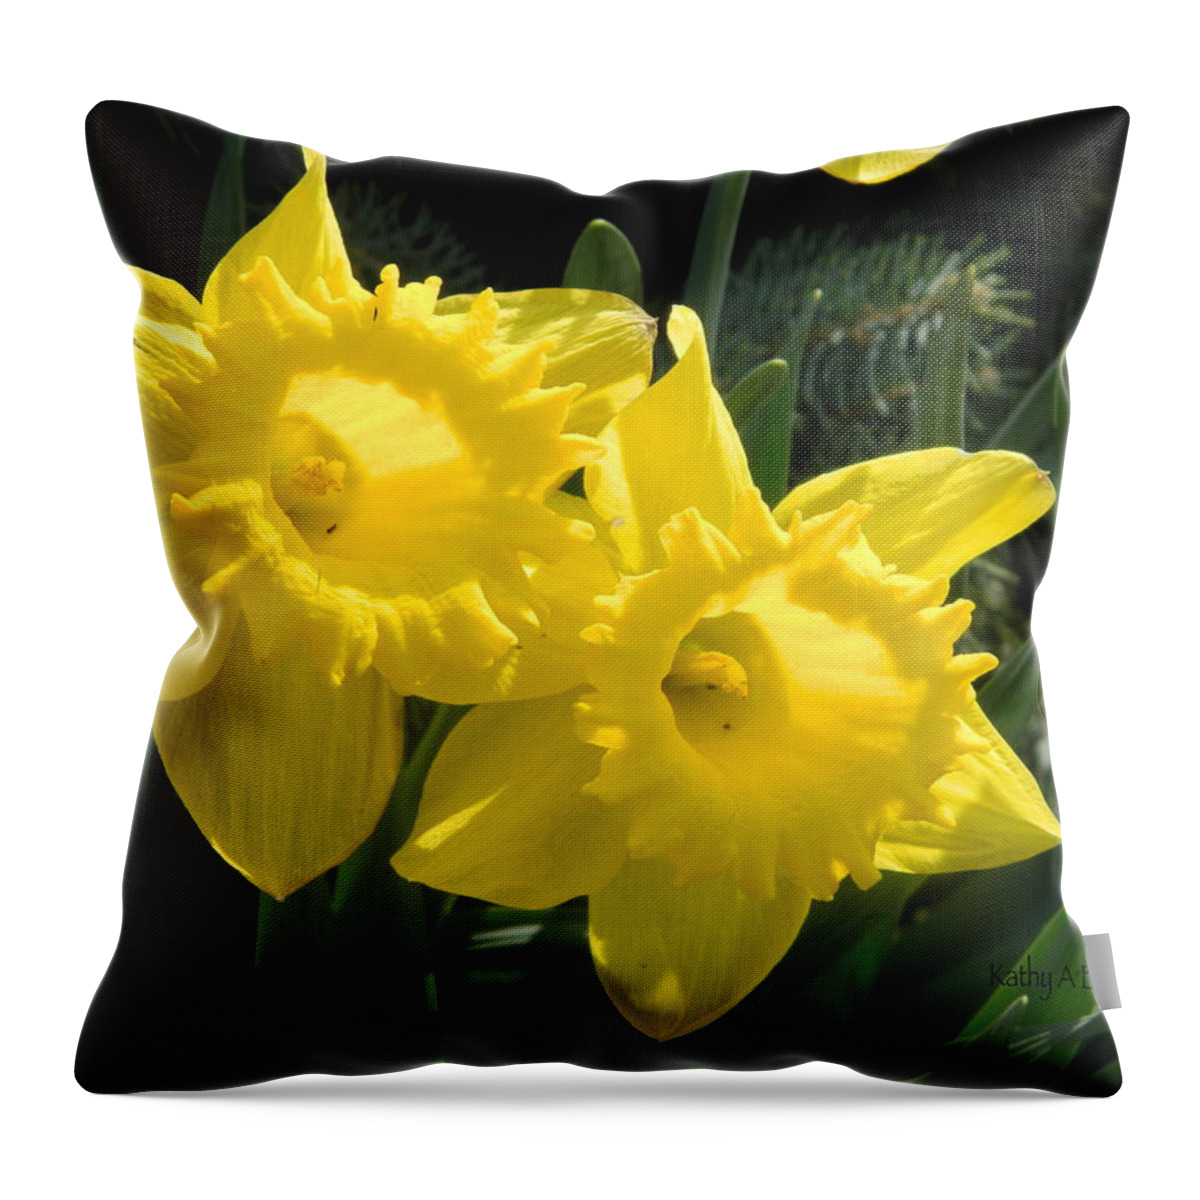 Daffodils Throw Pillow featuring the photograph Two Daffodils by Kathy Barney